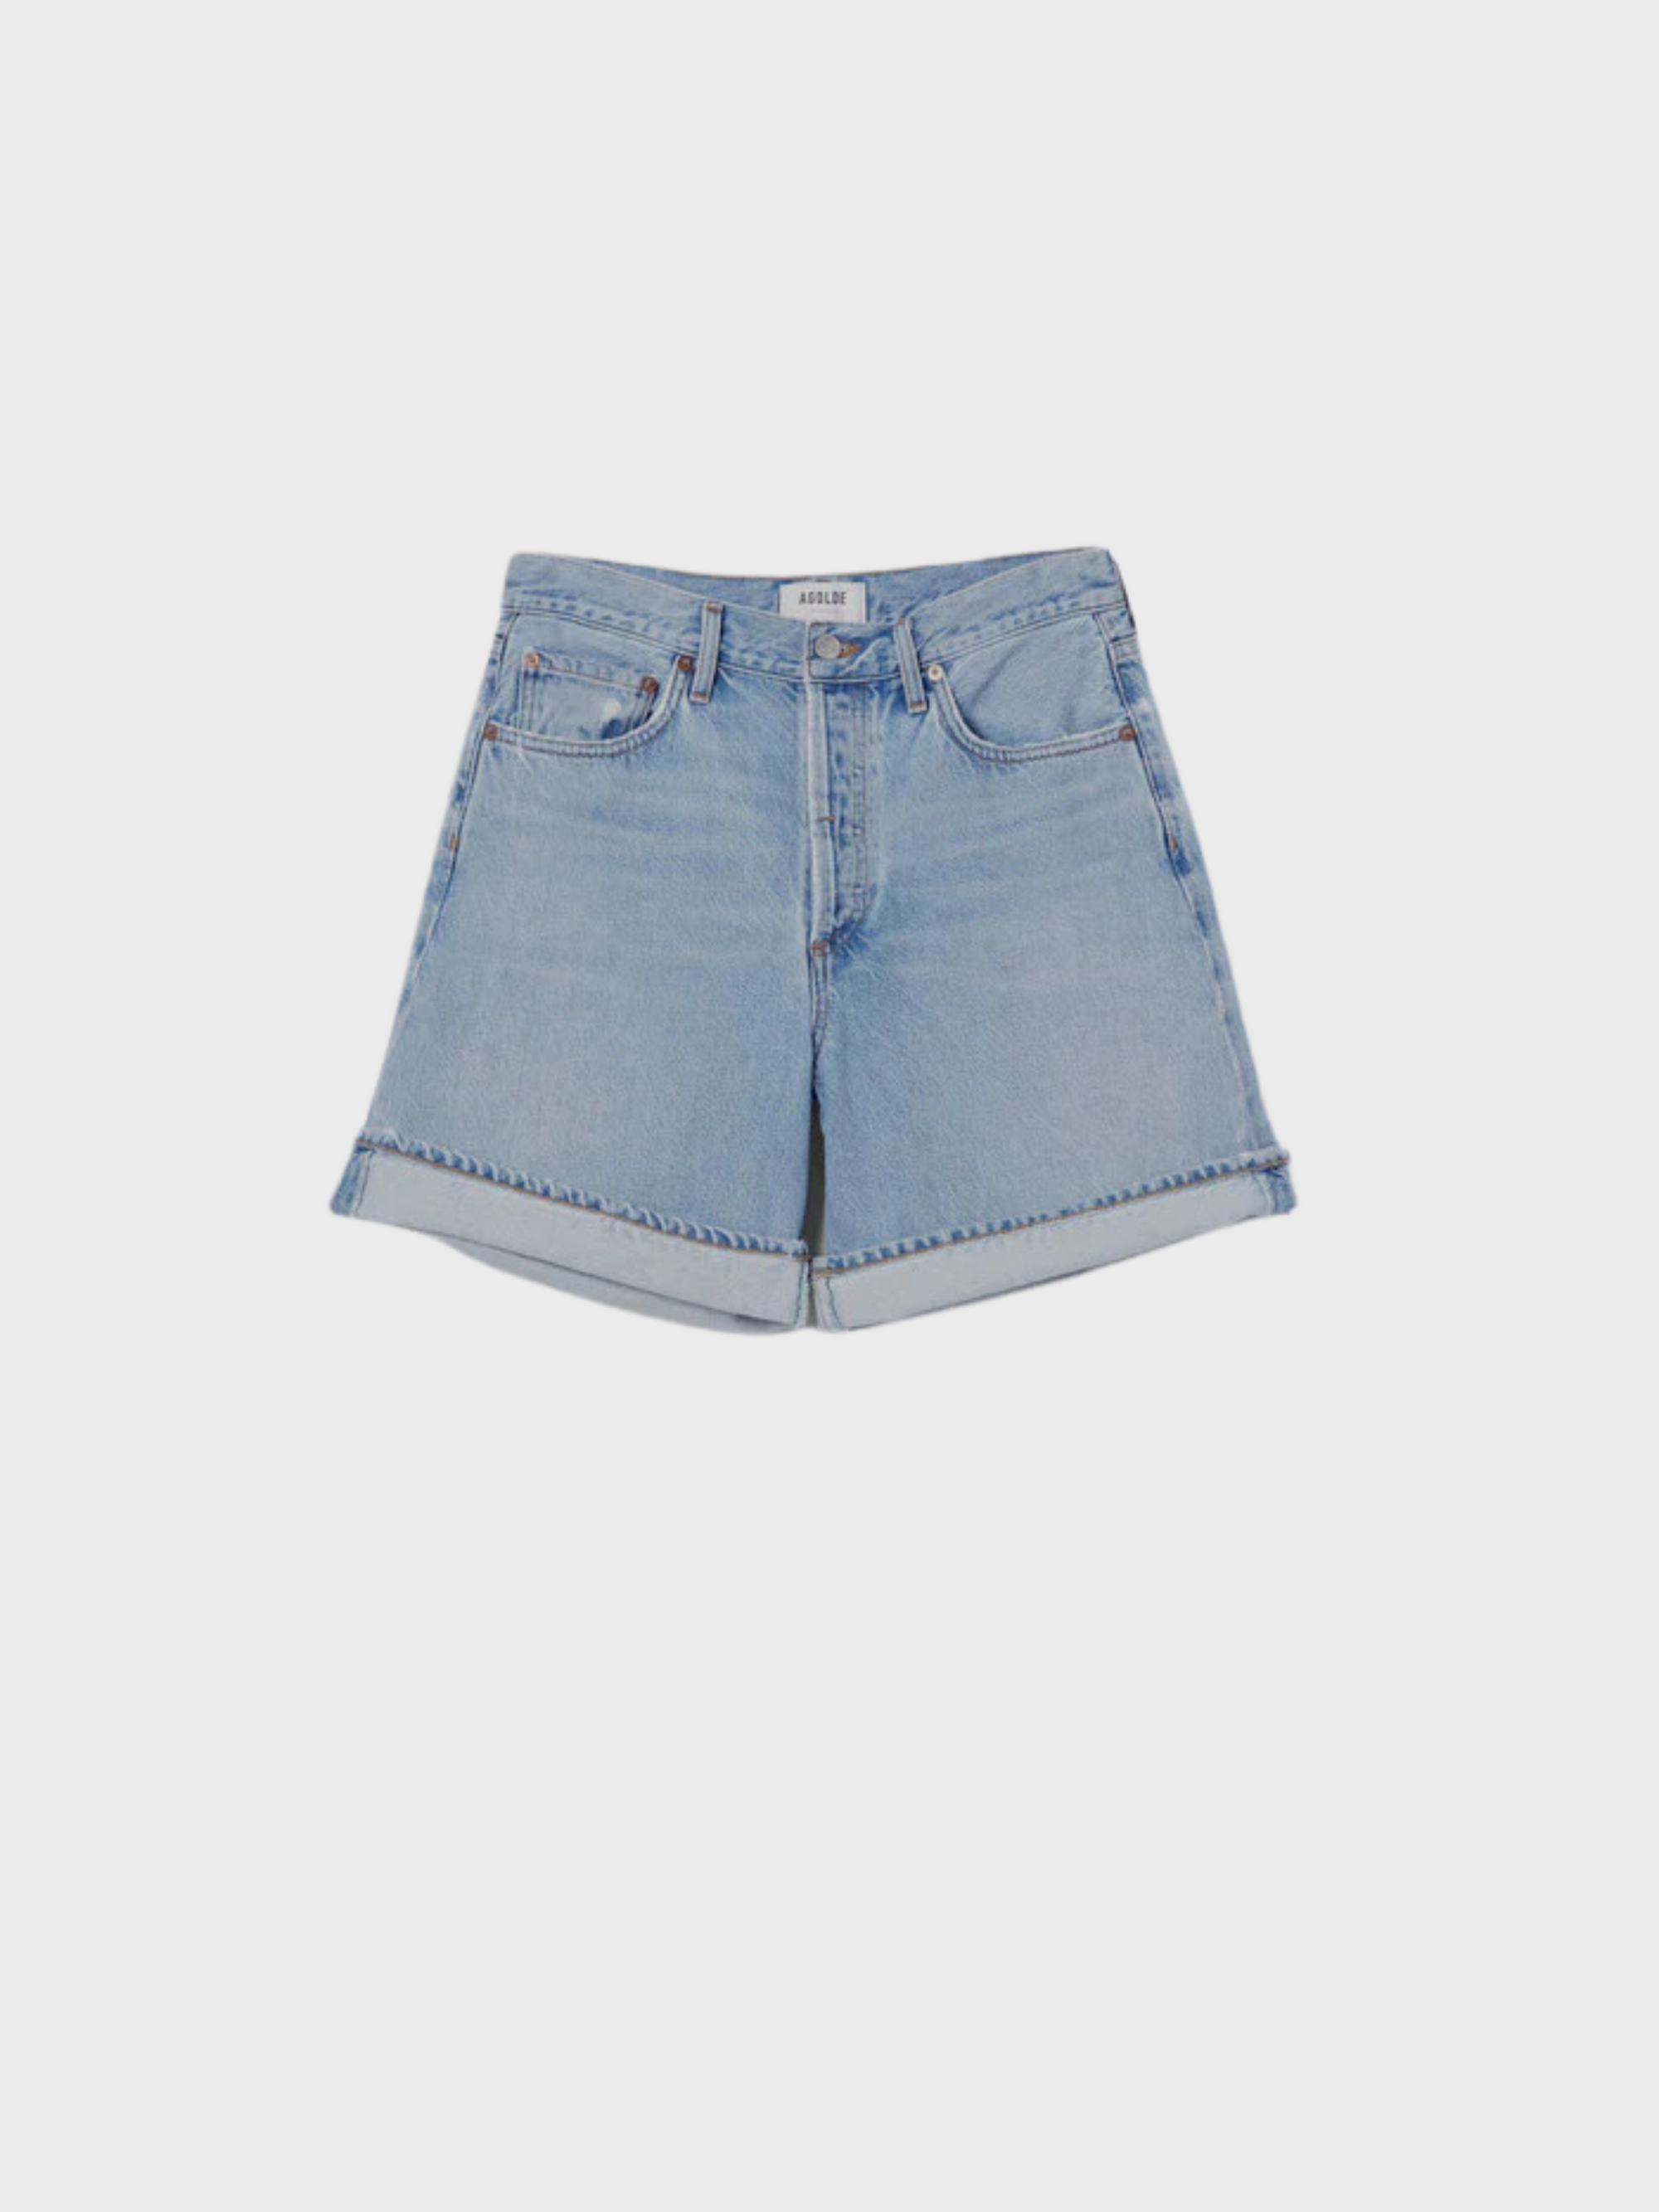 Agolde Dame Denim Short Tension-Shorts-West of Woodward Boutique-Vancouver-Canada